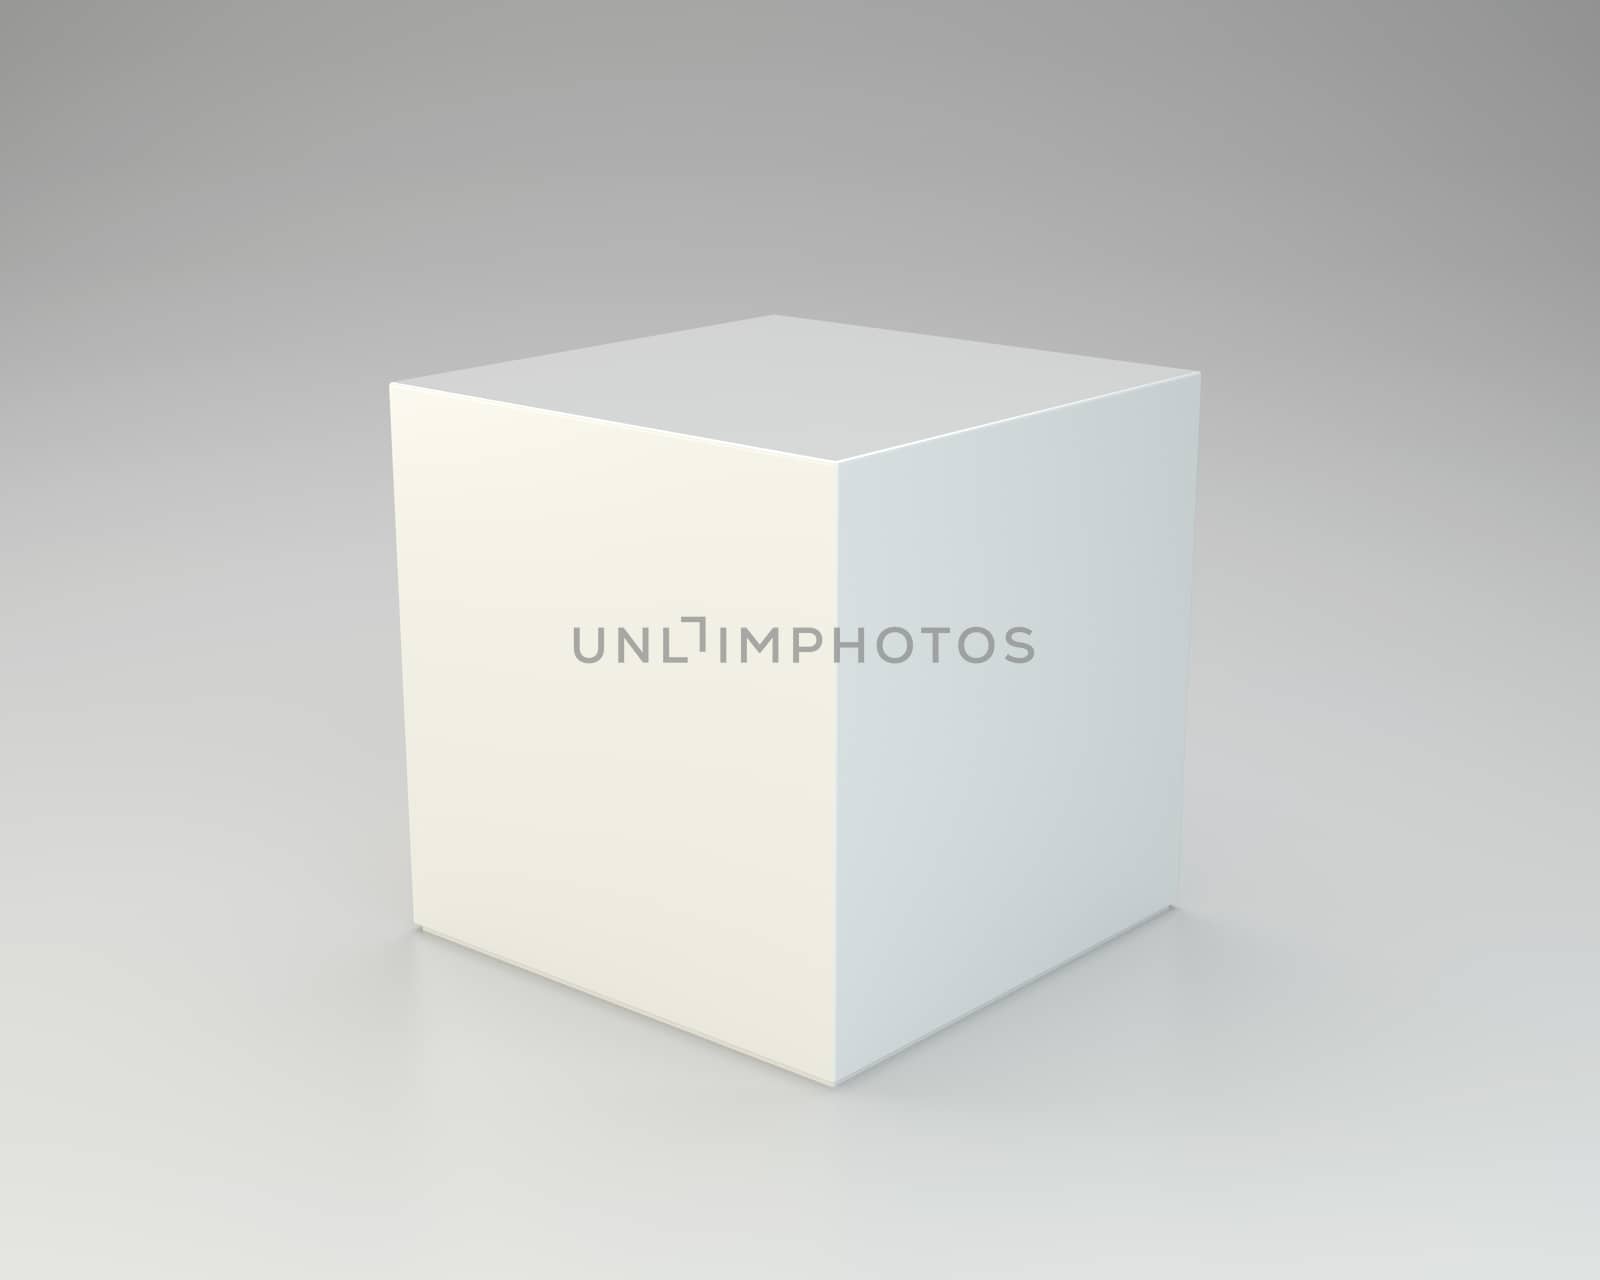 Blank box on gray background by Mirexon